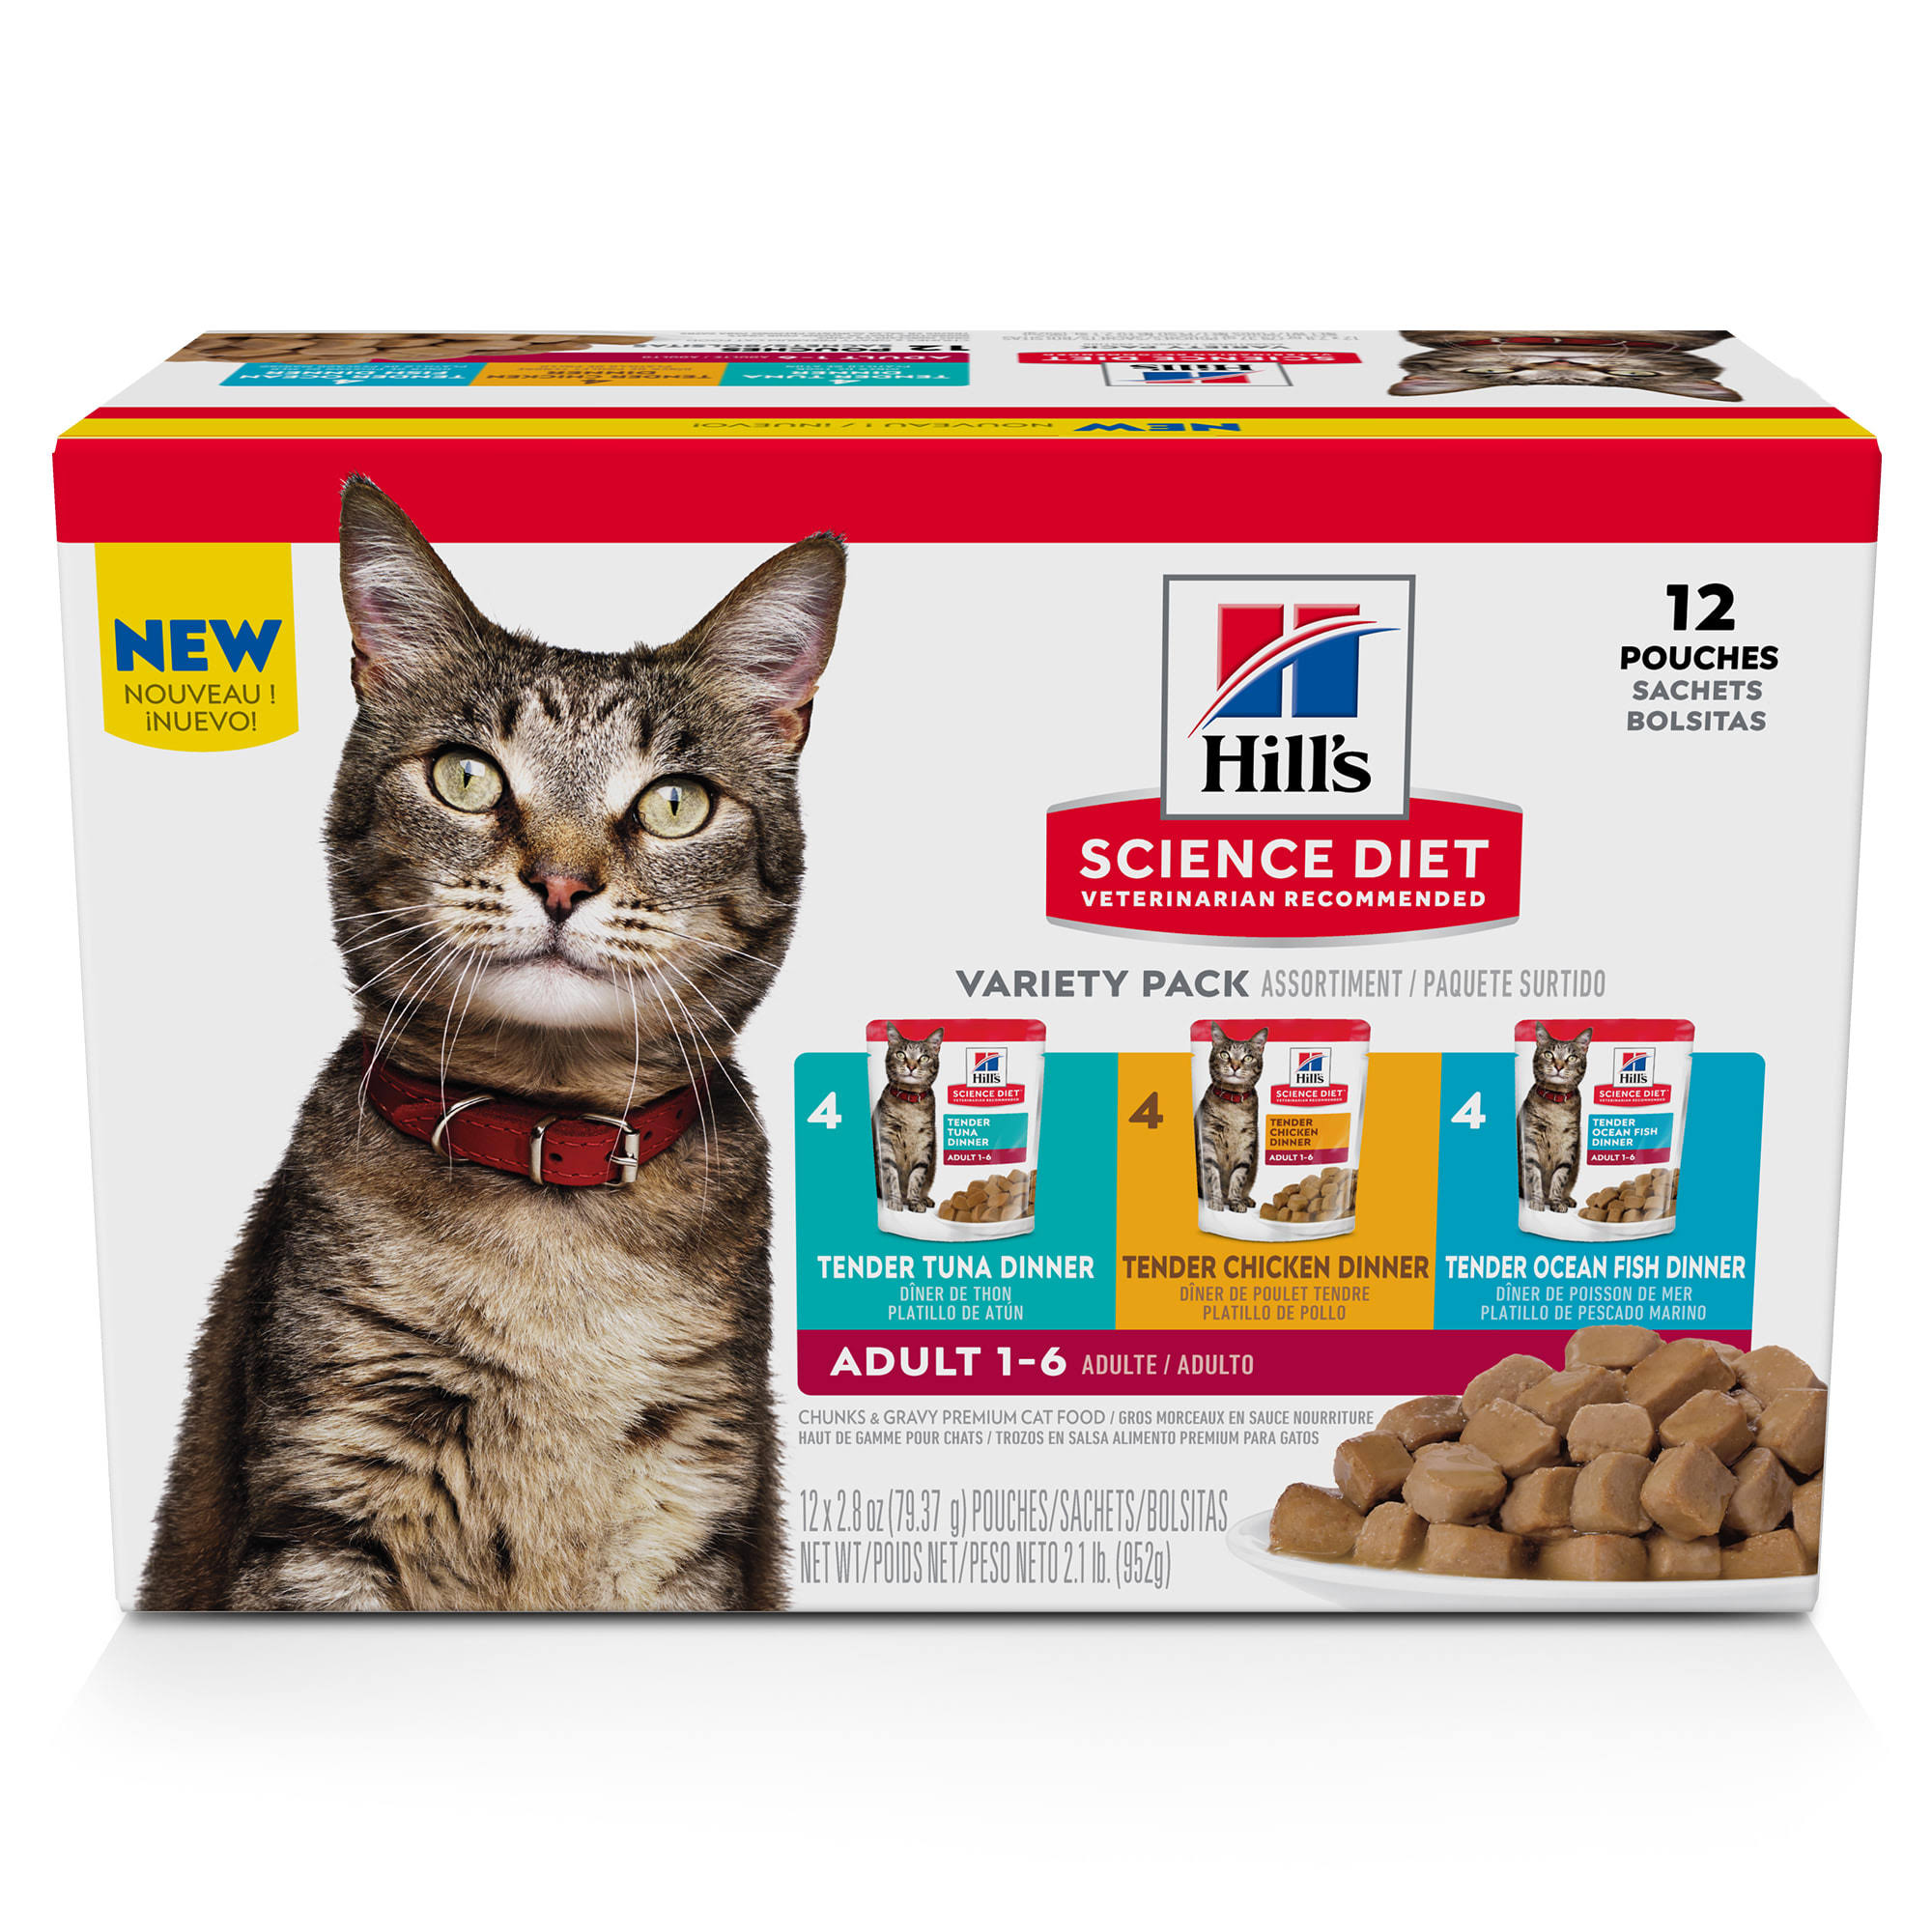 Science Diet Cat Food, Premium, Chunks & Gravy, Variety Pack, Adult 1-6 - 12 pack, 2.8 oz pouches